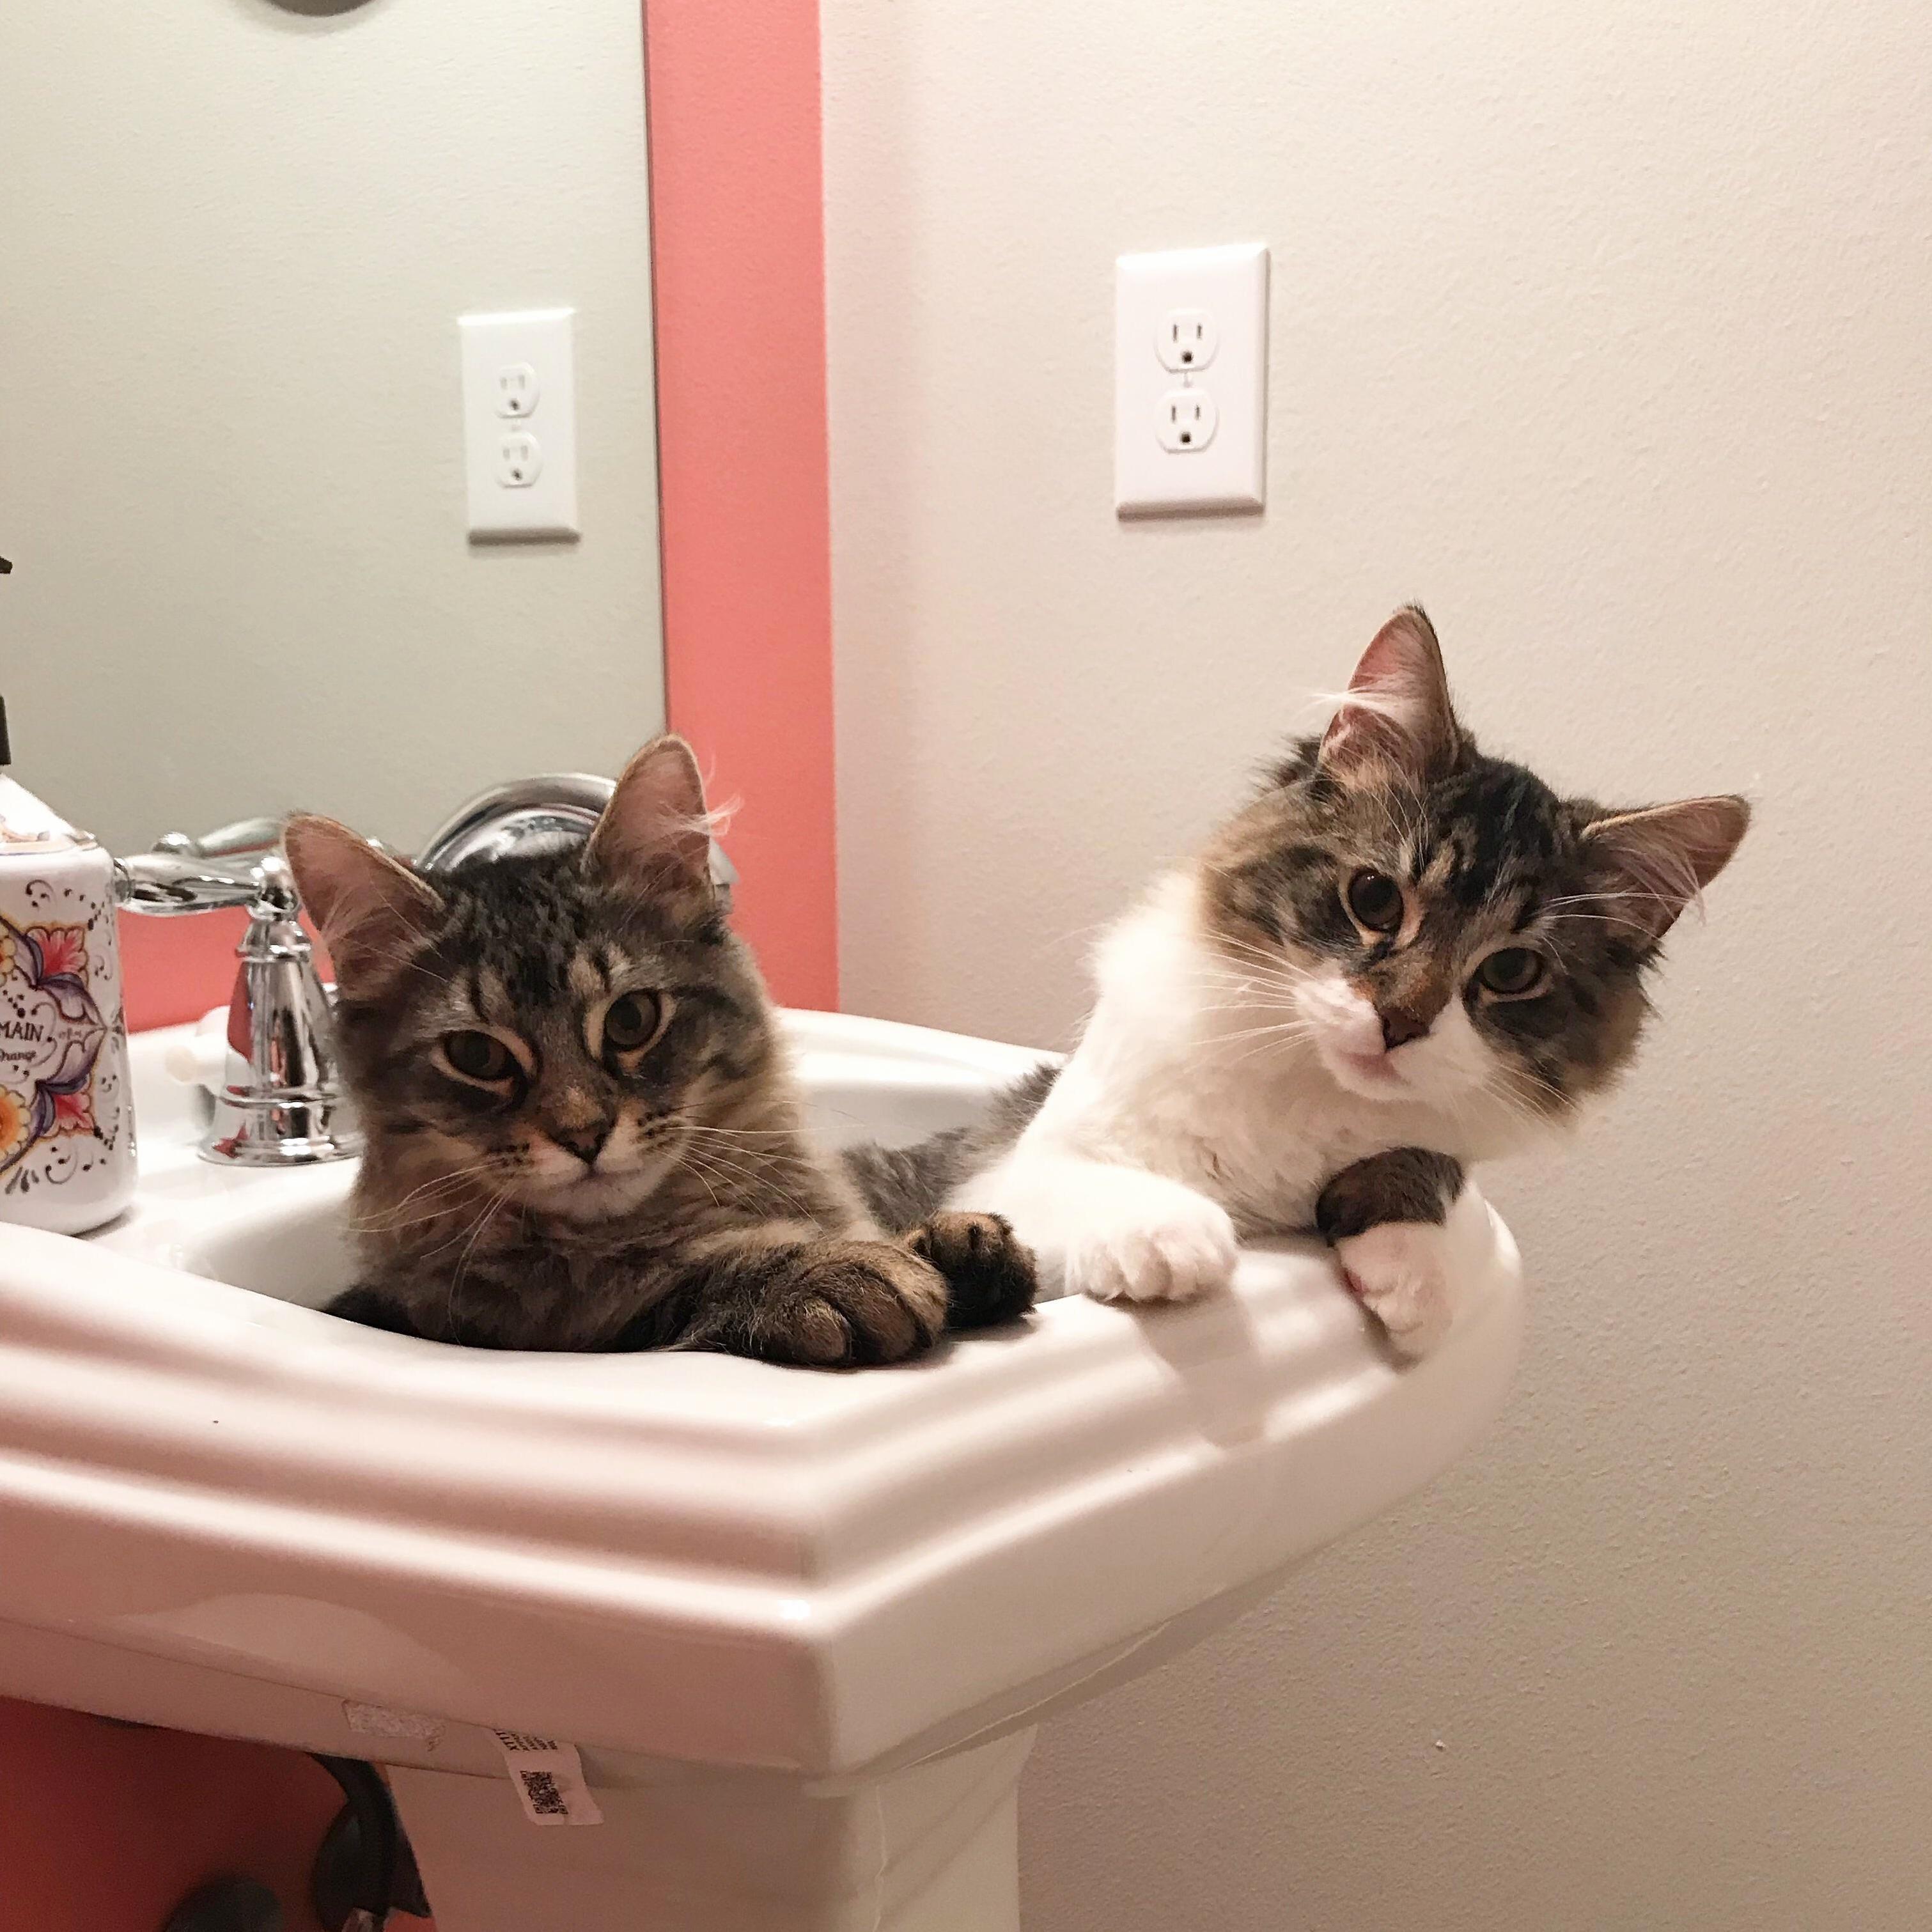 Everything but the kitten sink. starring rocky and oscar